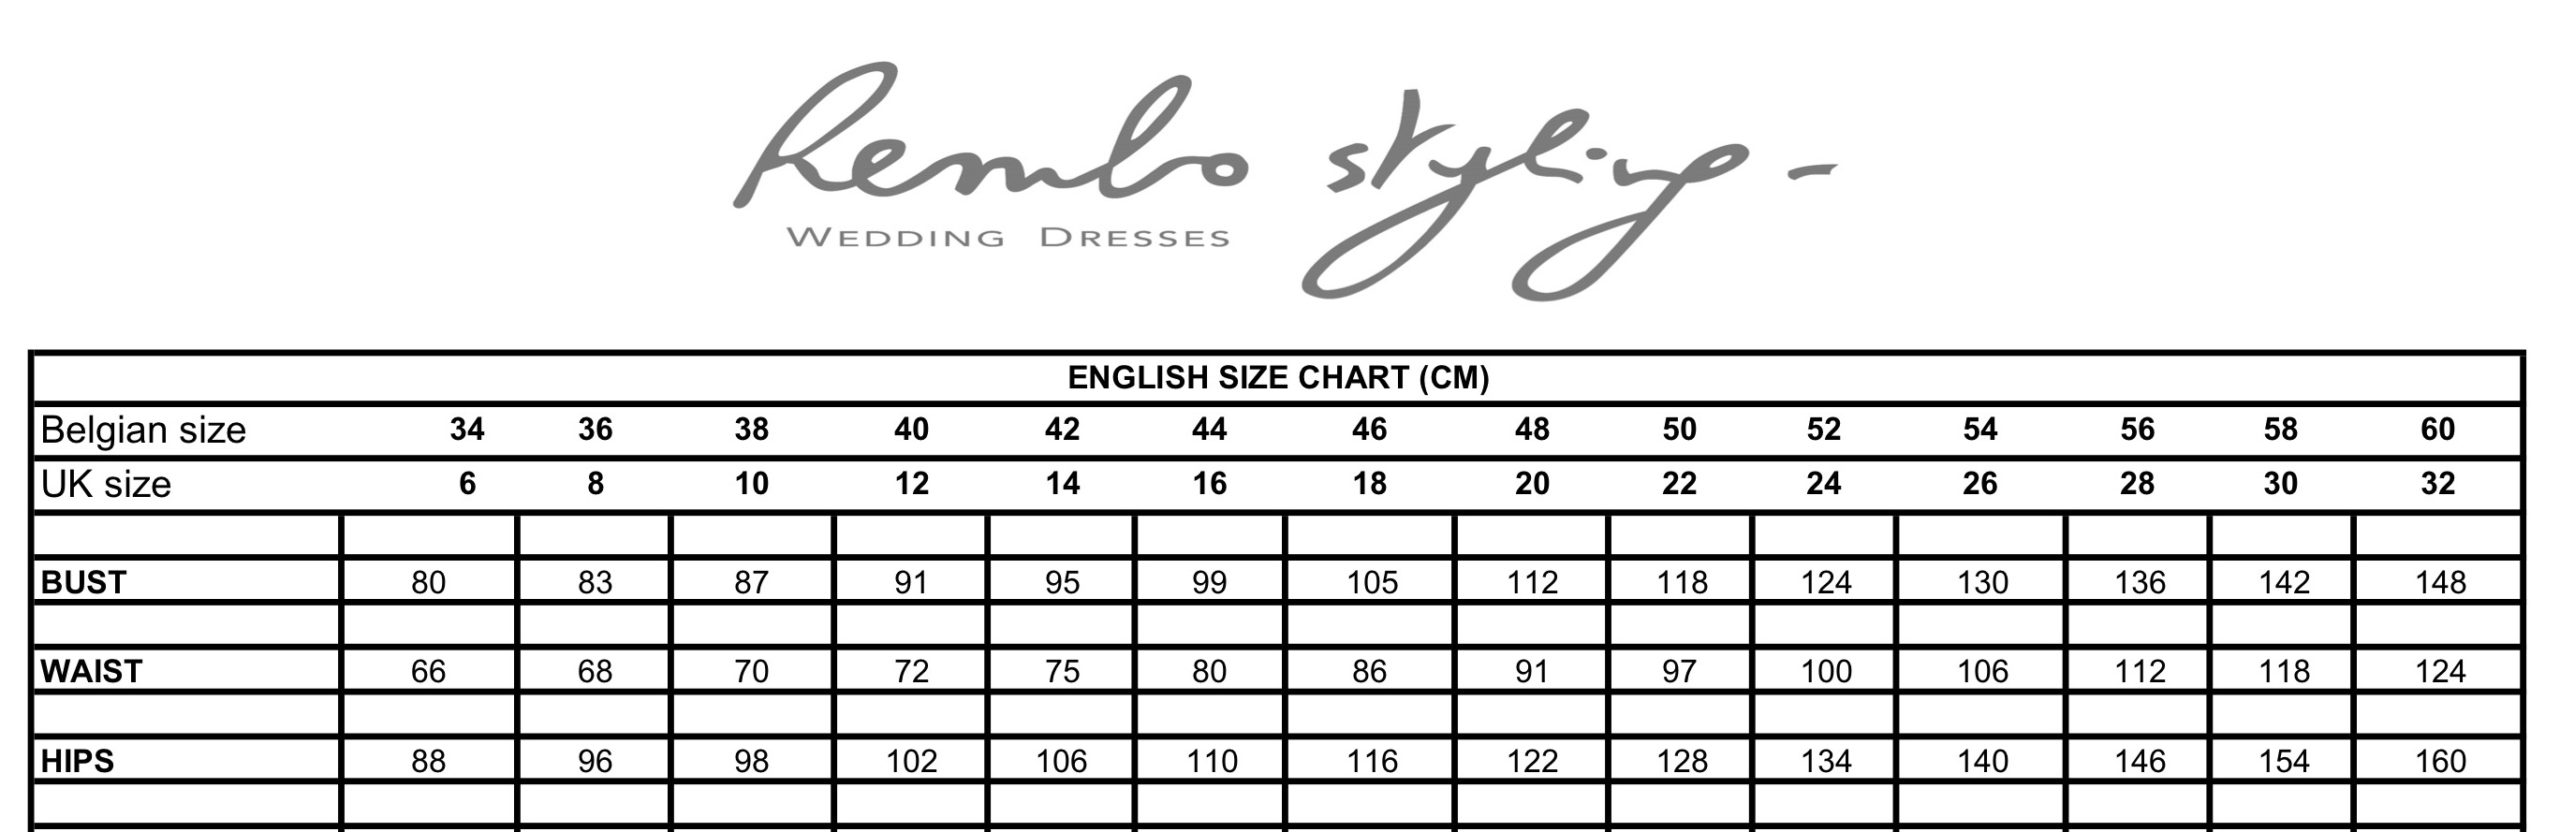 Rembo Size Chart